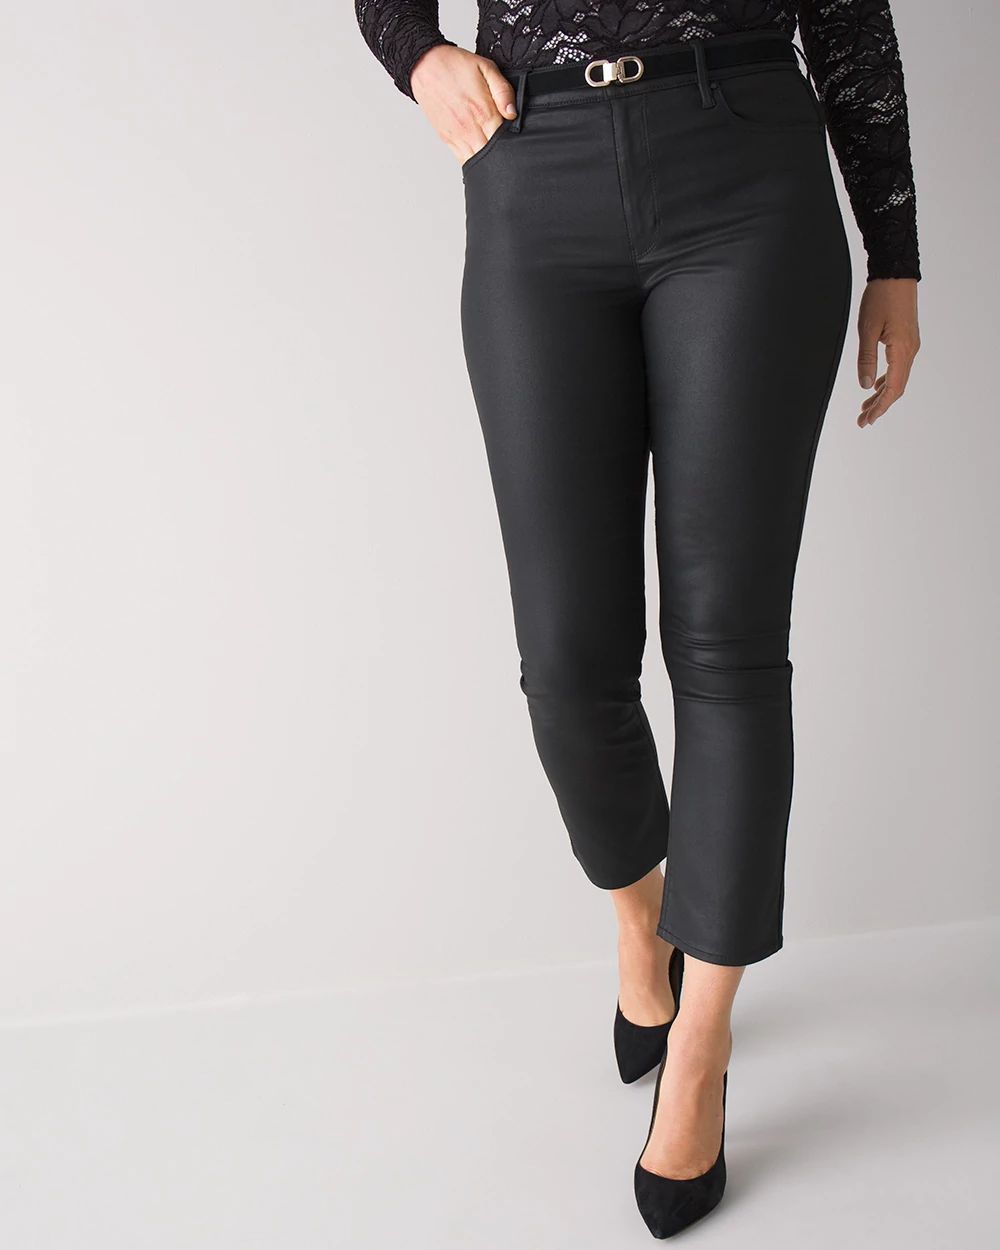 Curvy-Fit High-Rise Coated Bootcut Crop Jeans click to view larger image.